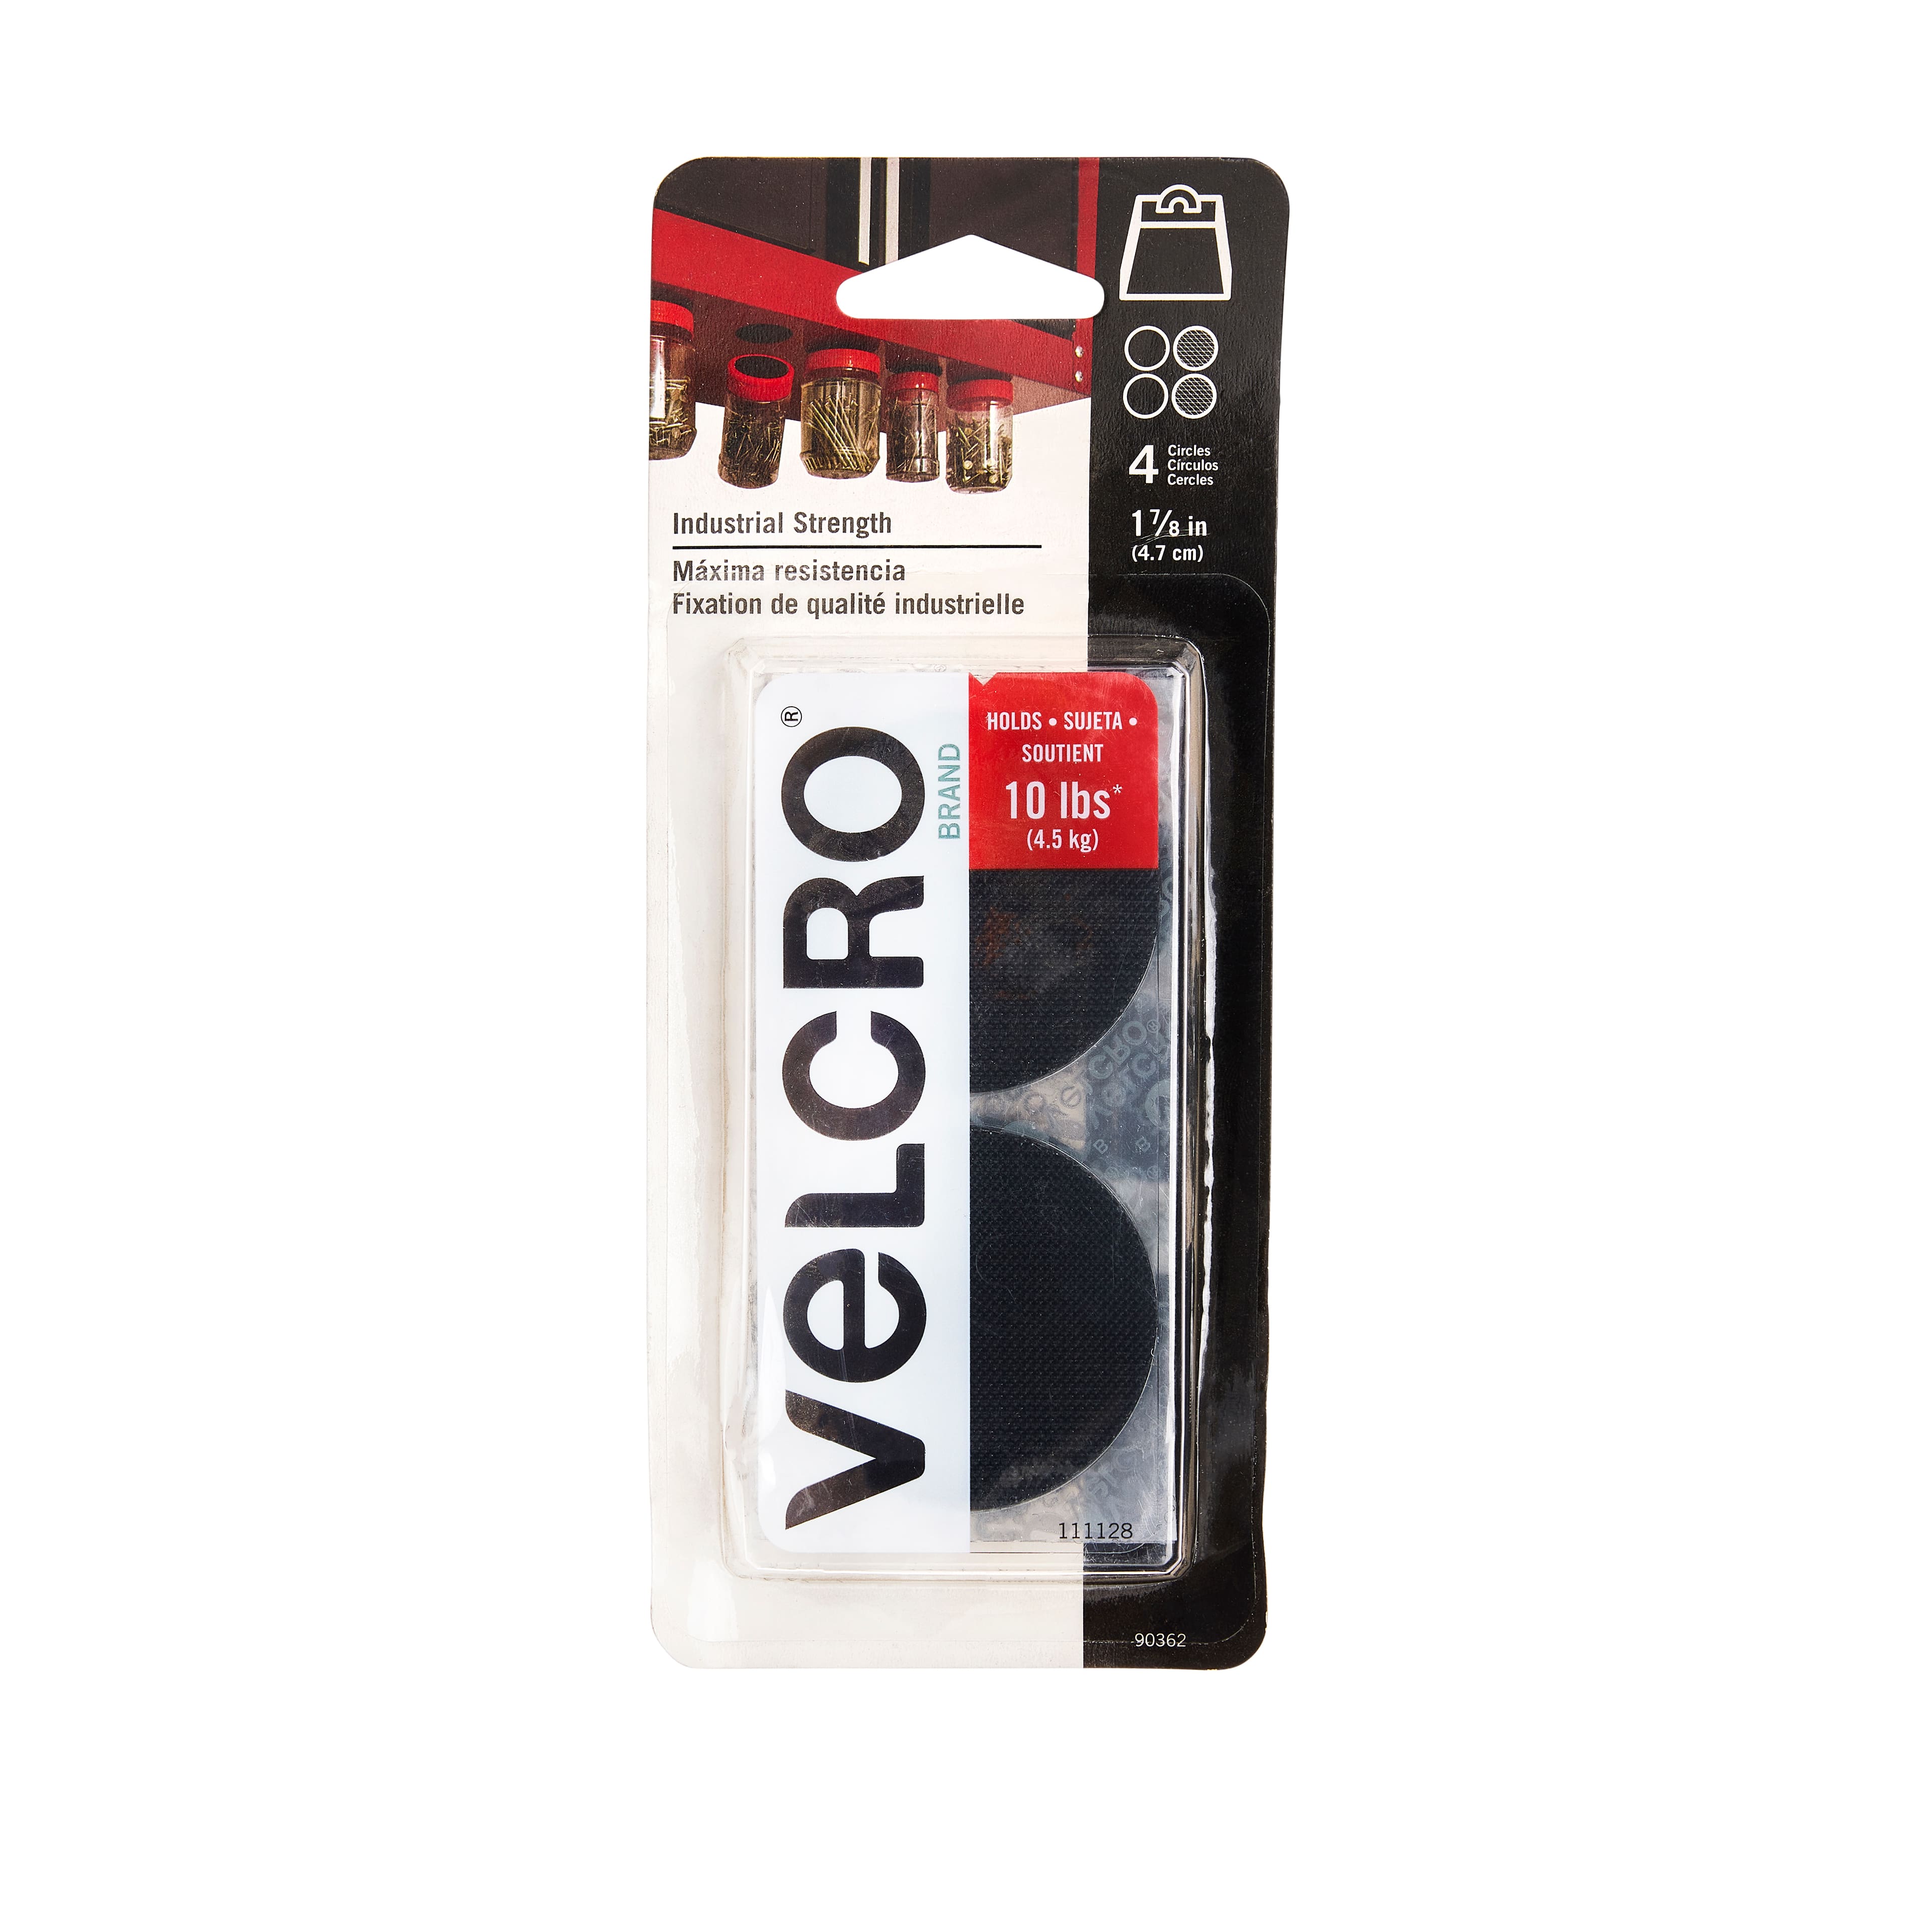 VELCRO Brand Industrial Strength Fasteners Stick-On Adhesive